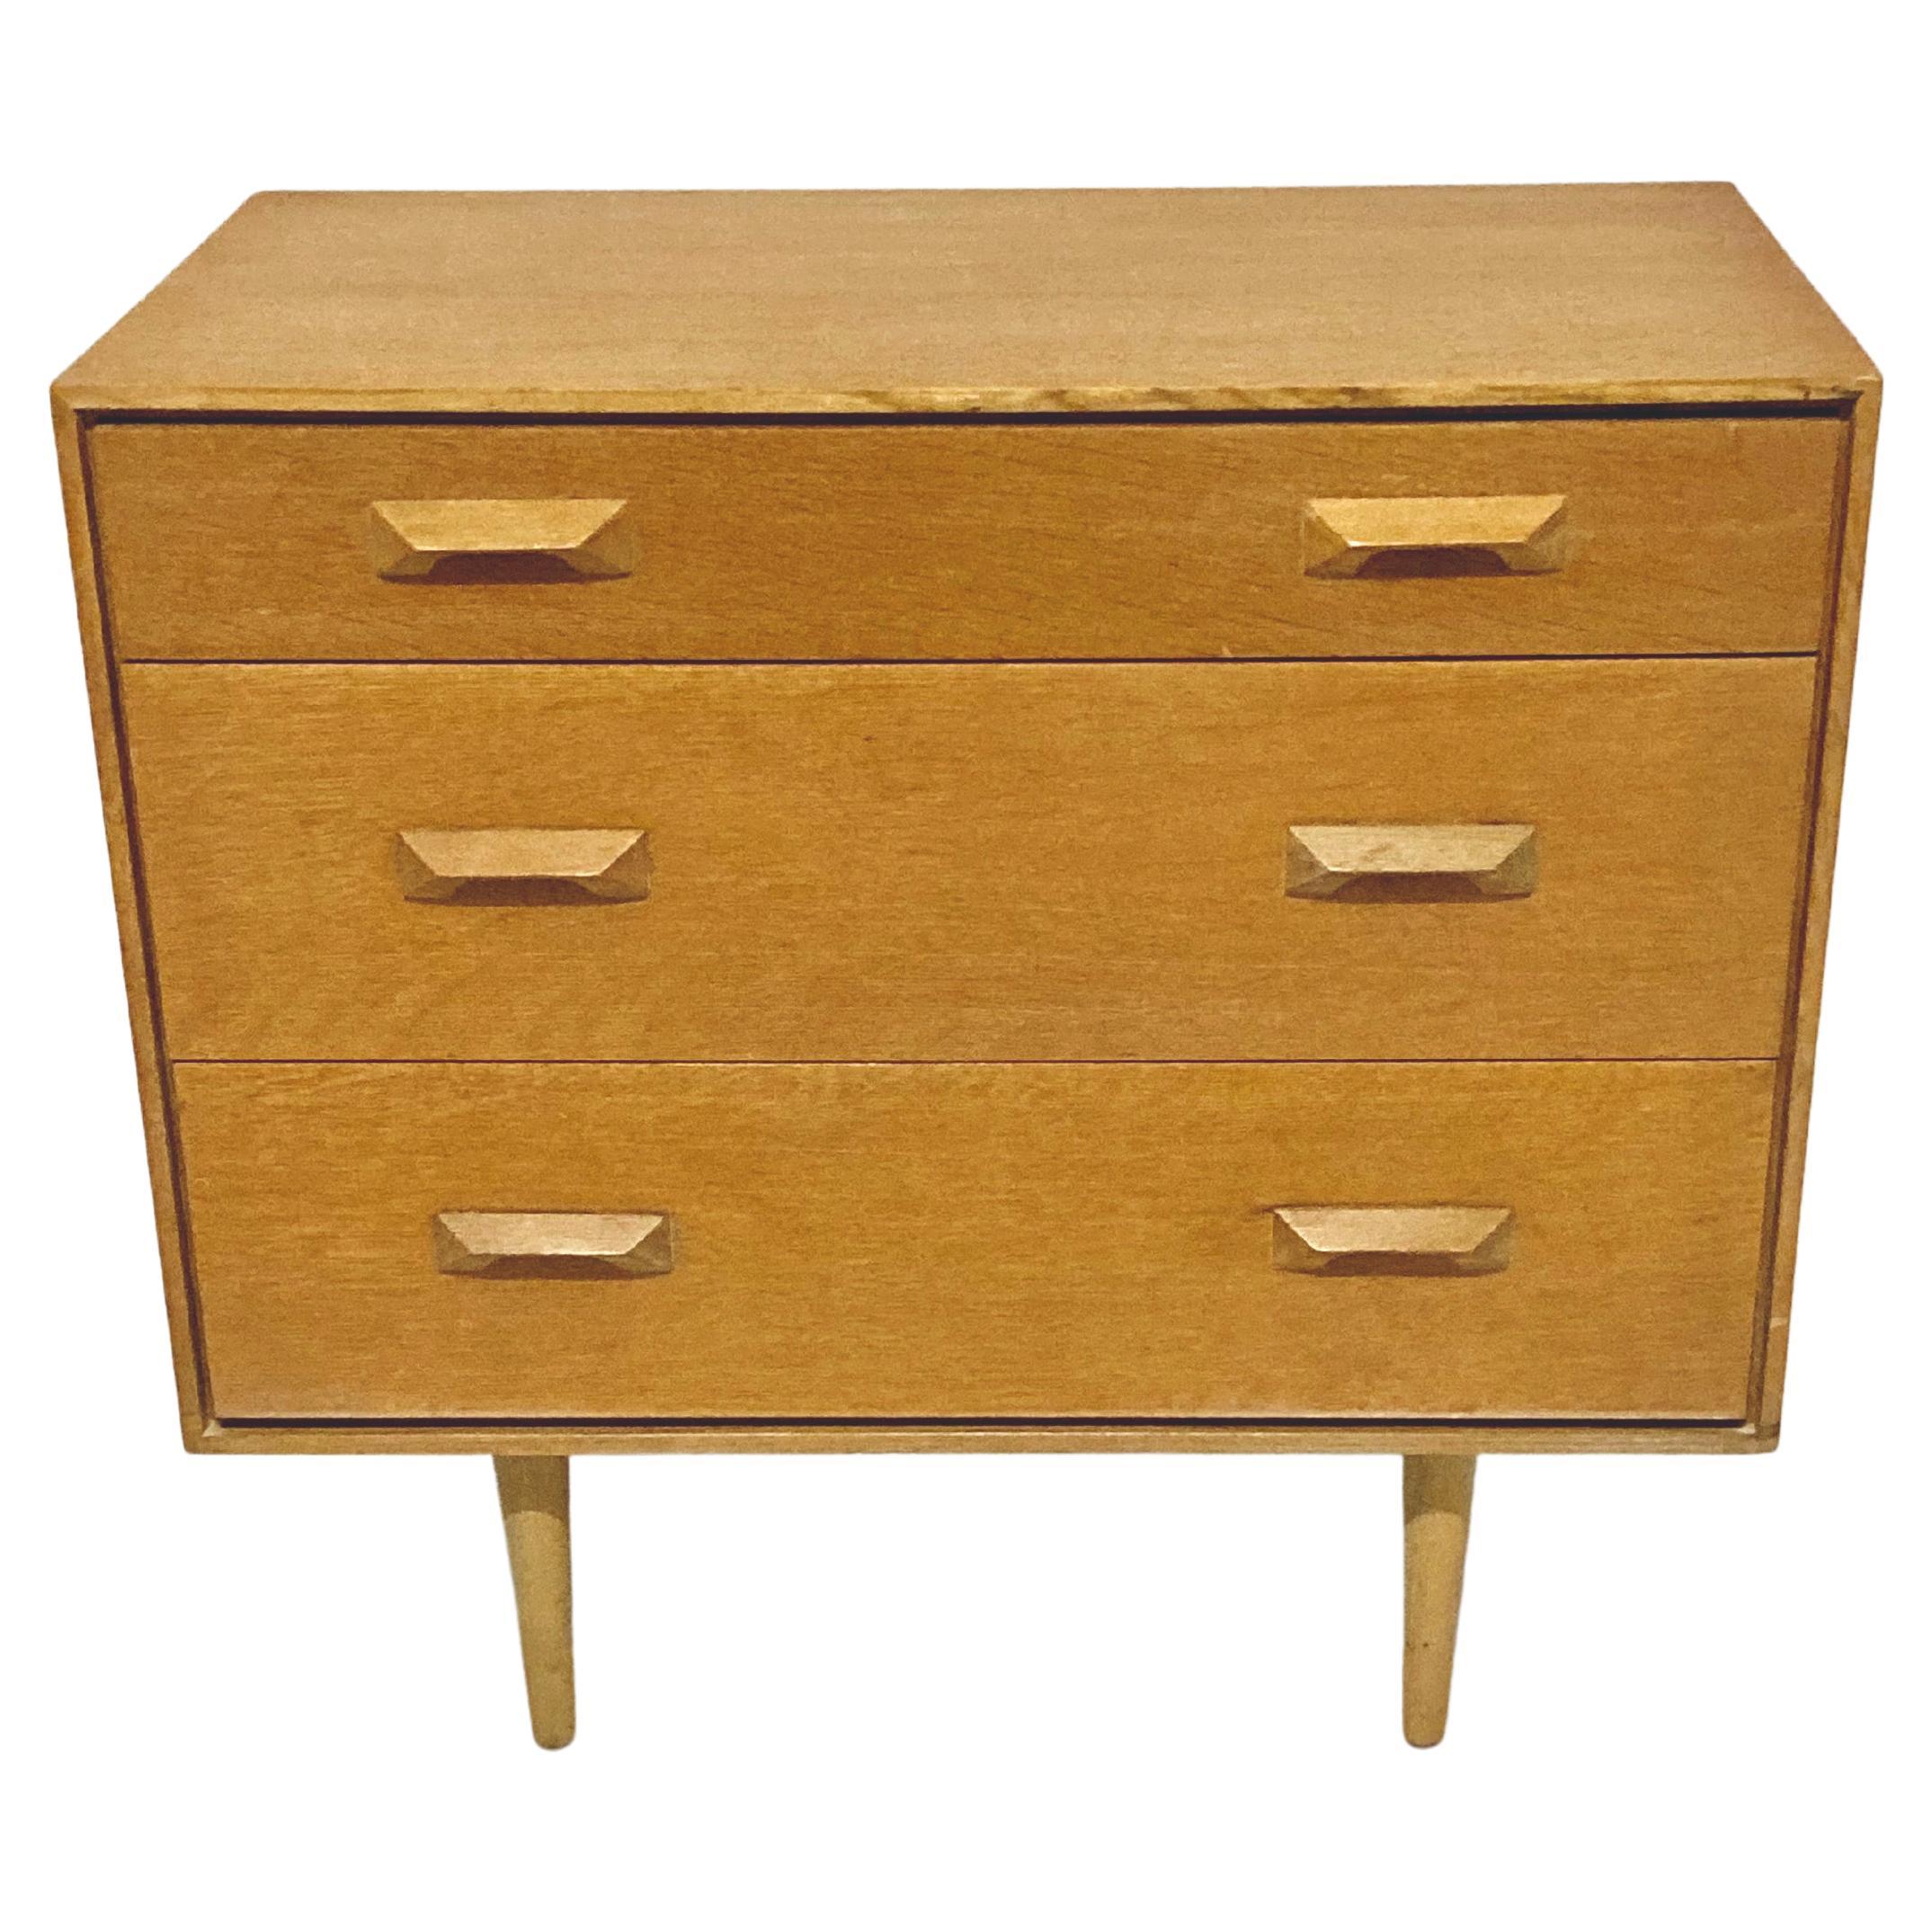 A 1960s stag three drawer Concord range chest of drawers designed John & Sylvia Reid. In light oak finish and on tapering legs.

Legs unscrew for ease of storage and transport. 

Bears metal Stag label inside a drawer. 

John and Sylvia Reid